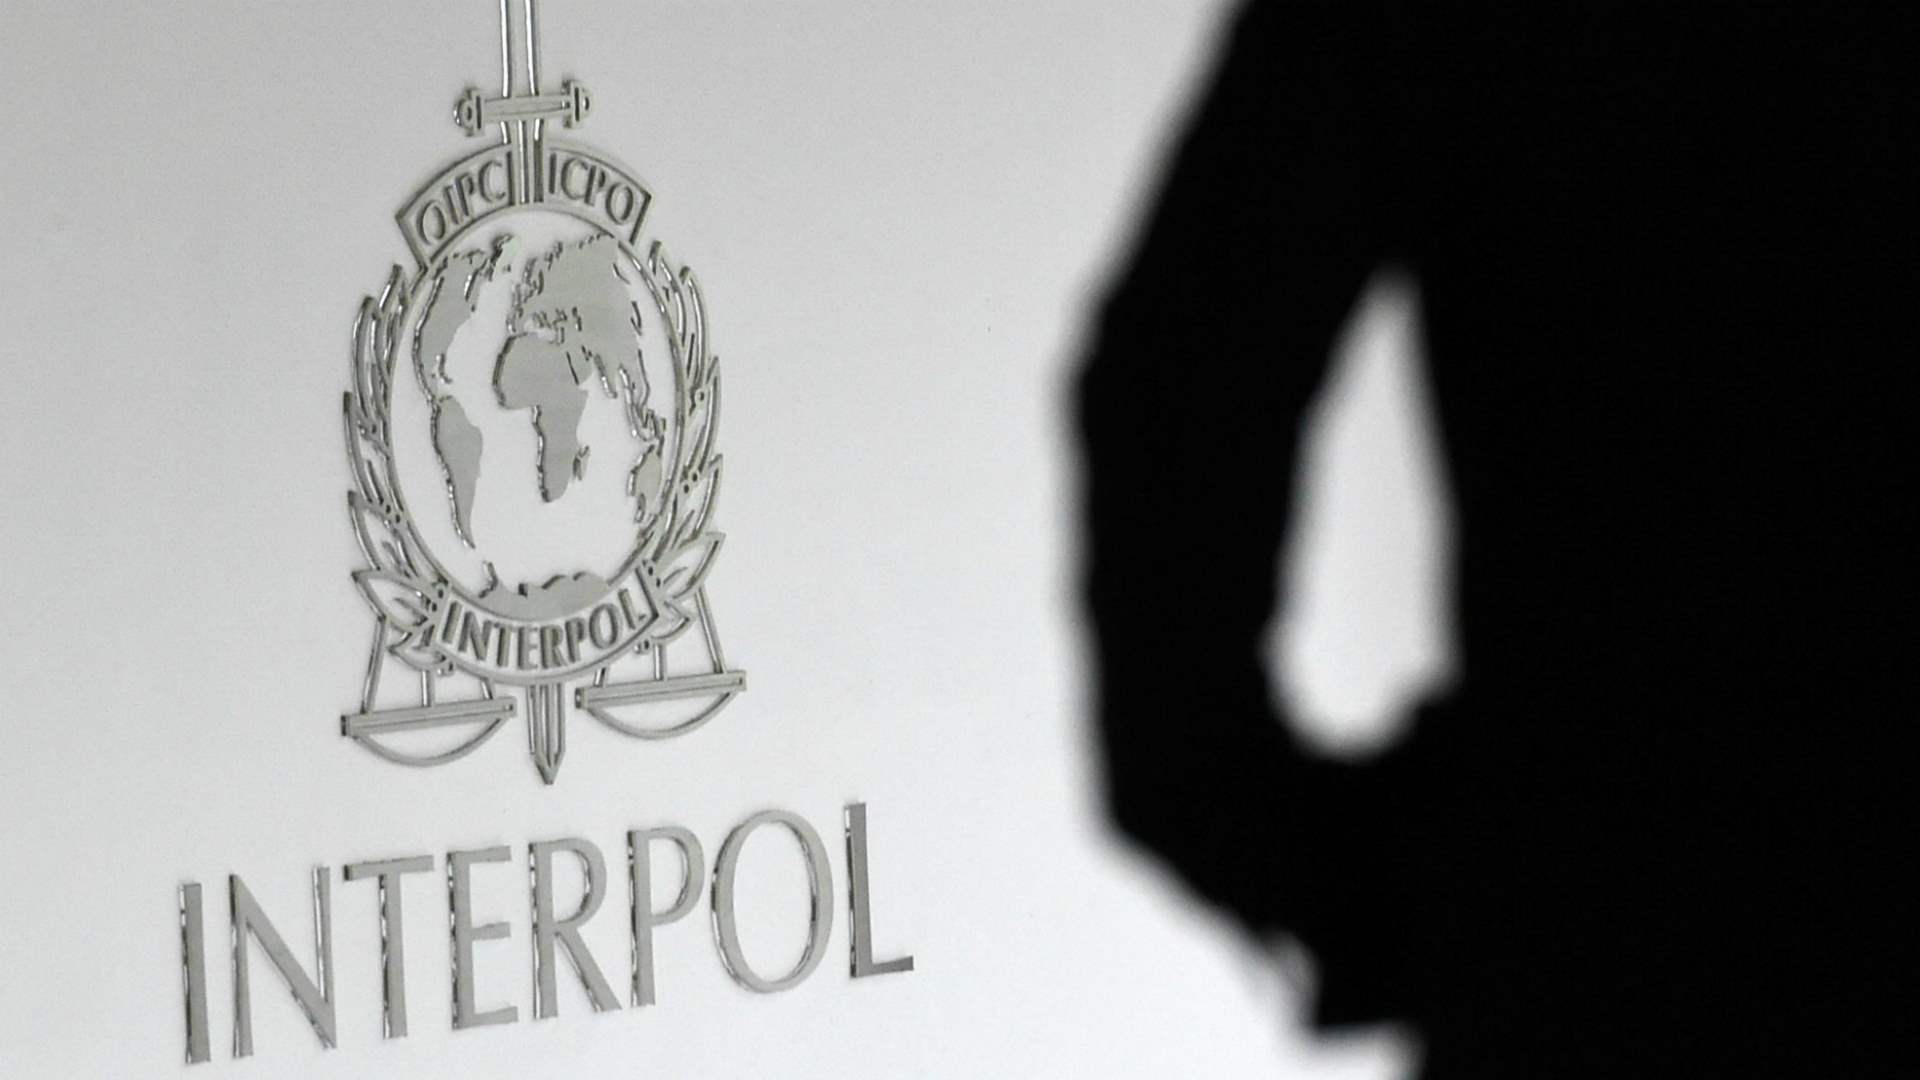 Interpol reports arresting 219 individuals in 39 countries on charges of human trafficking